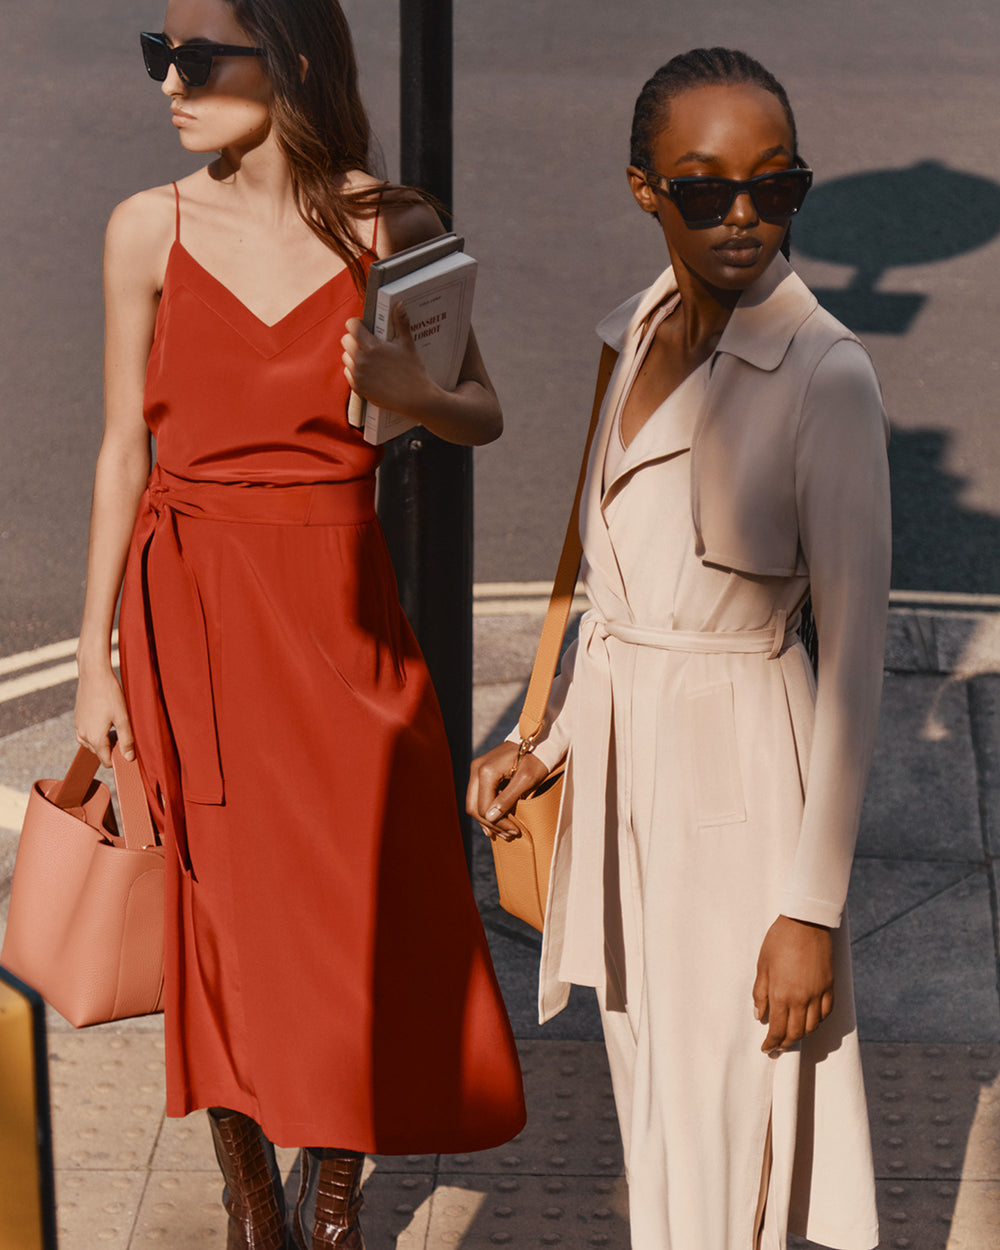 Two women walking on a street, one holding a coffee cup.